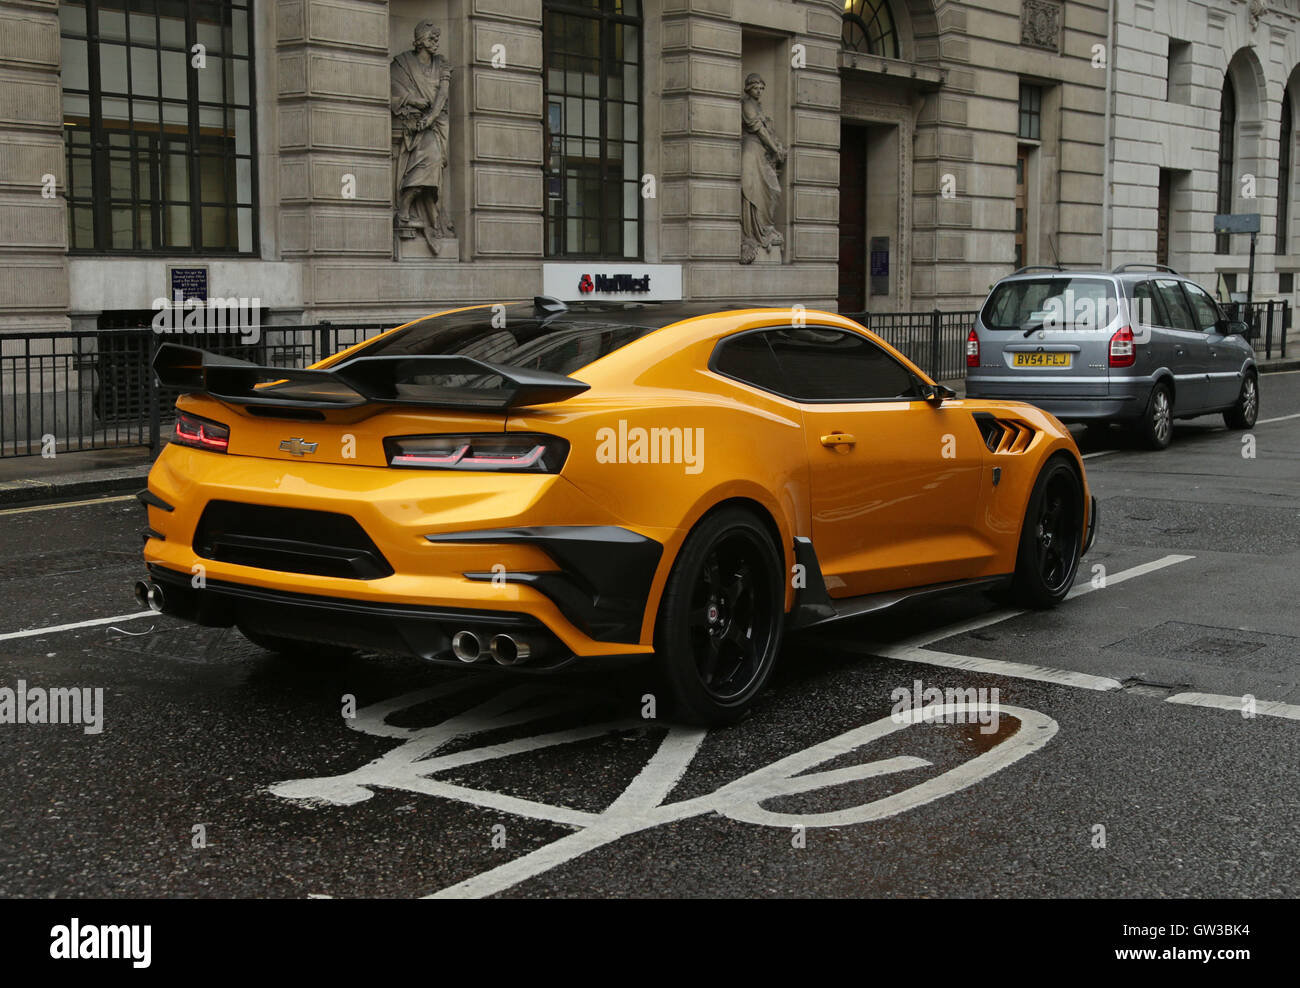 A Chevrolet Camaro sports car during filming of the film Transformers: The Last  Knight, in the City of London Stock Photo - Alamy